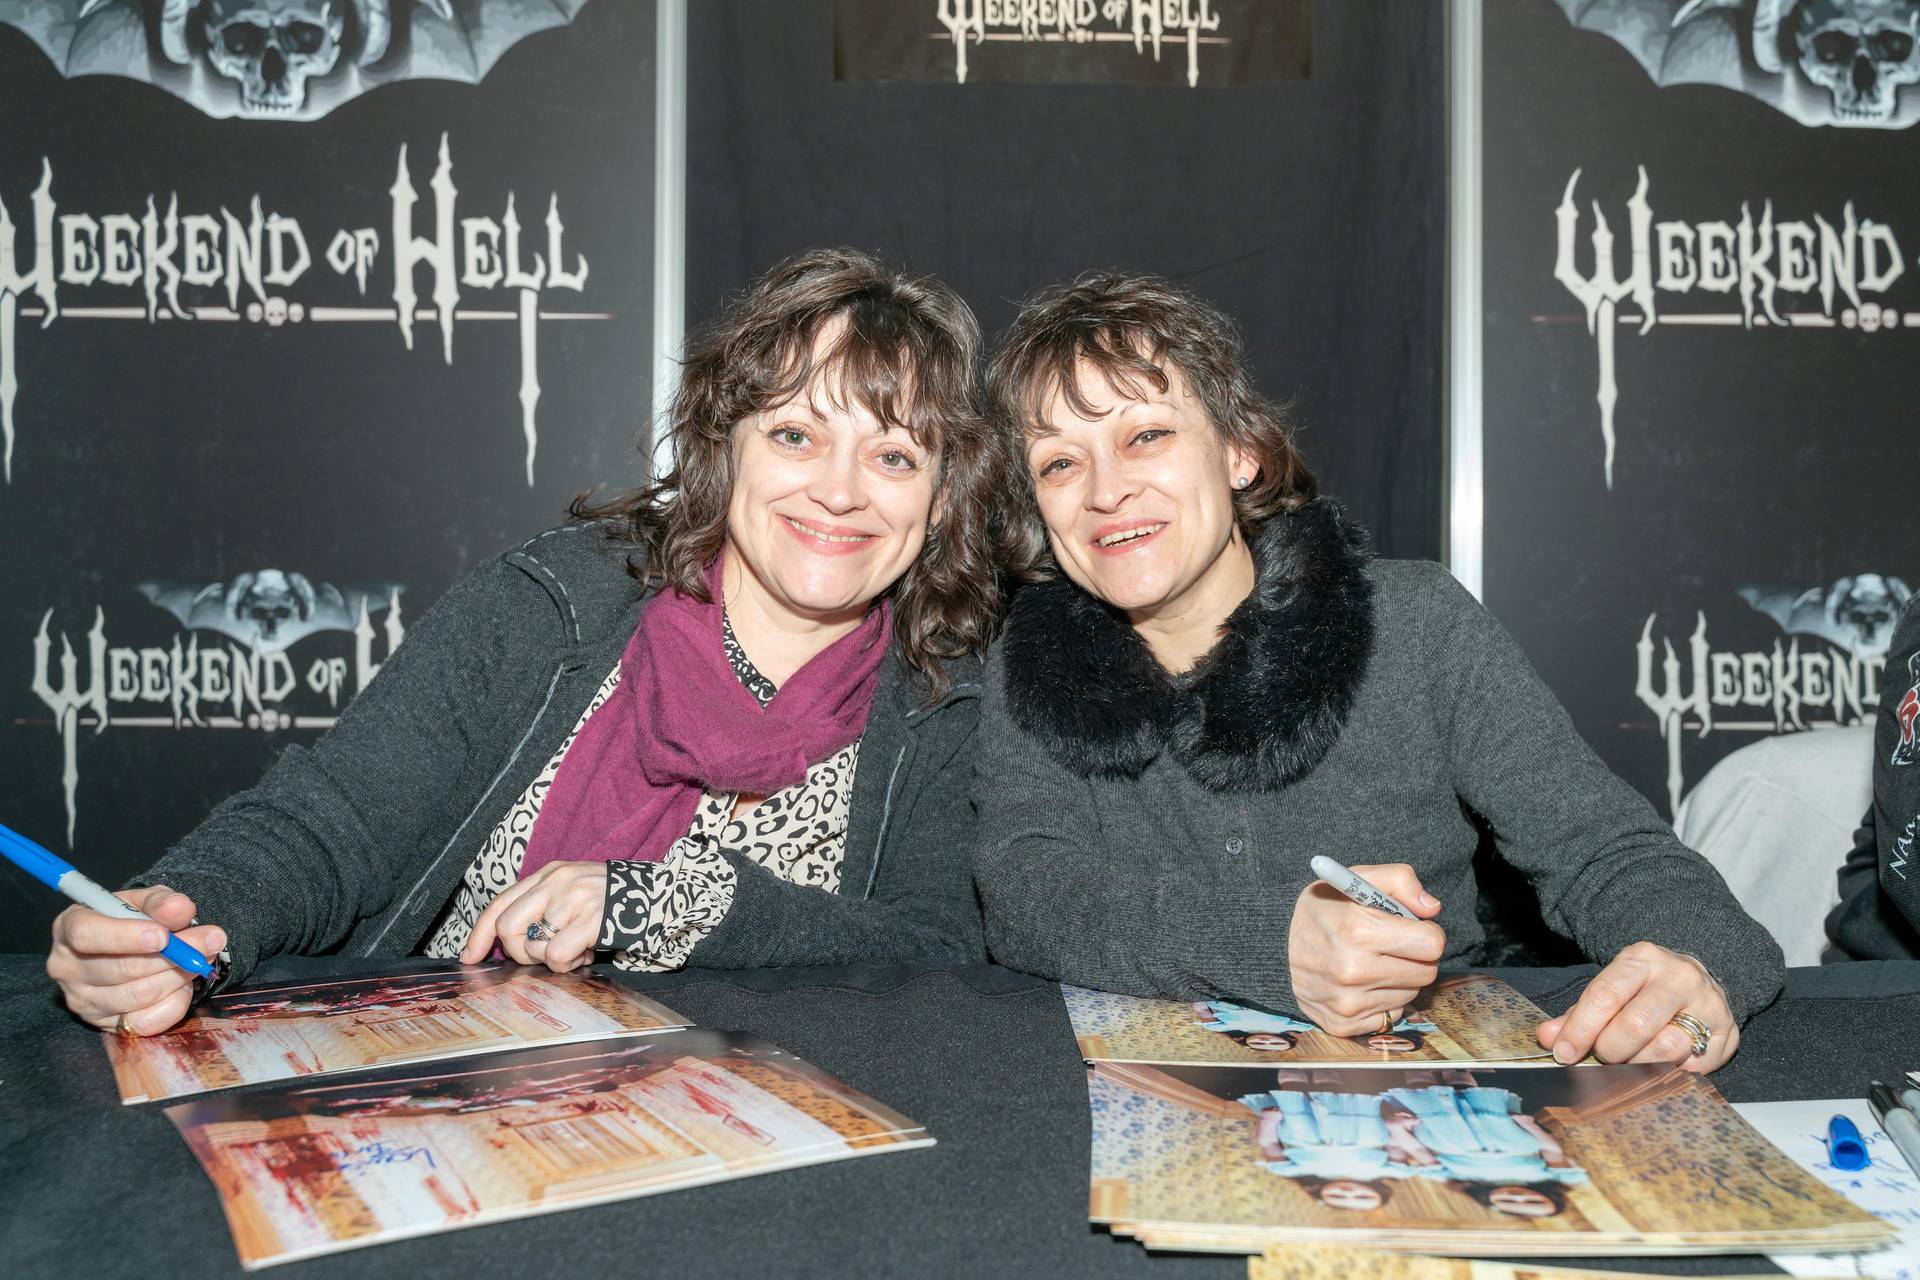 DORTMUND, GERMANY - April 13th 2018: Lisa & Louise Burns (twins, the Grady Girls in The Shining movie) at Weekend of Hell Spring Edition 2019